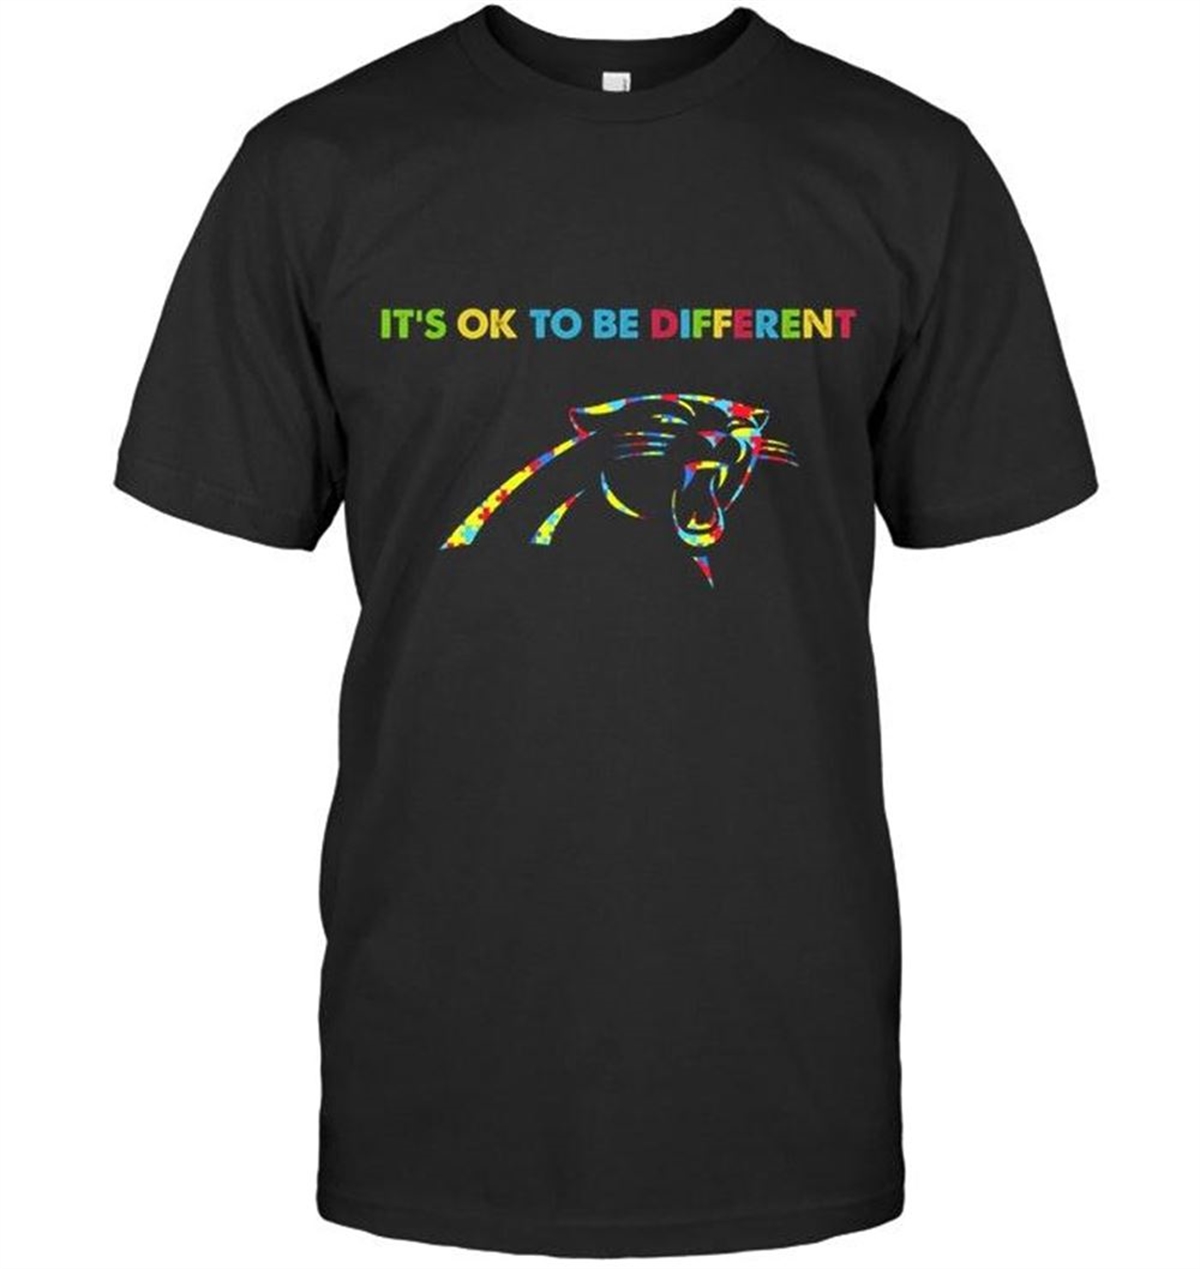 Carolina Football Team Autism Its Okie To Be Different T Shirt